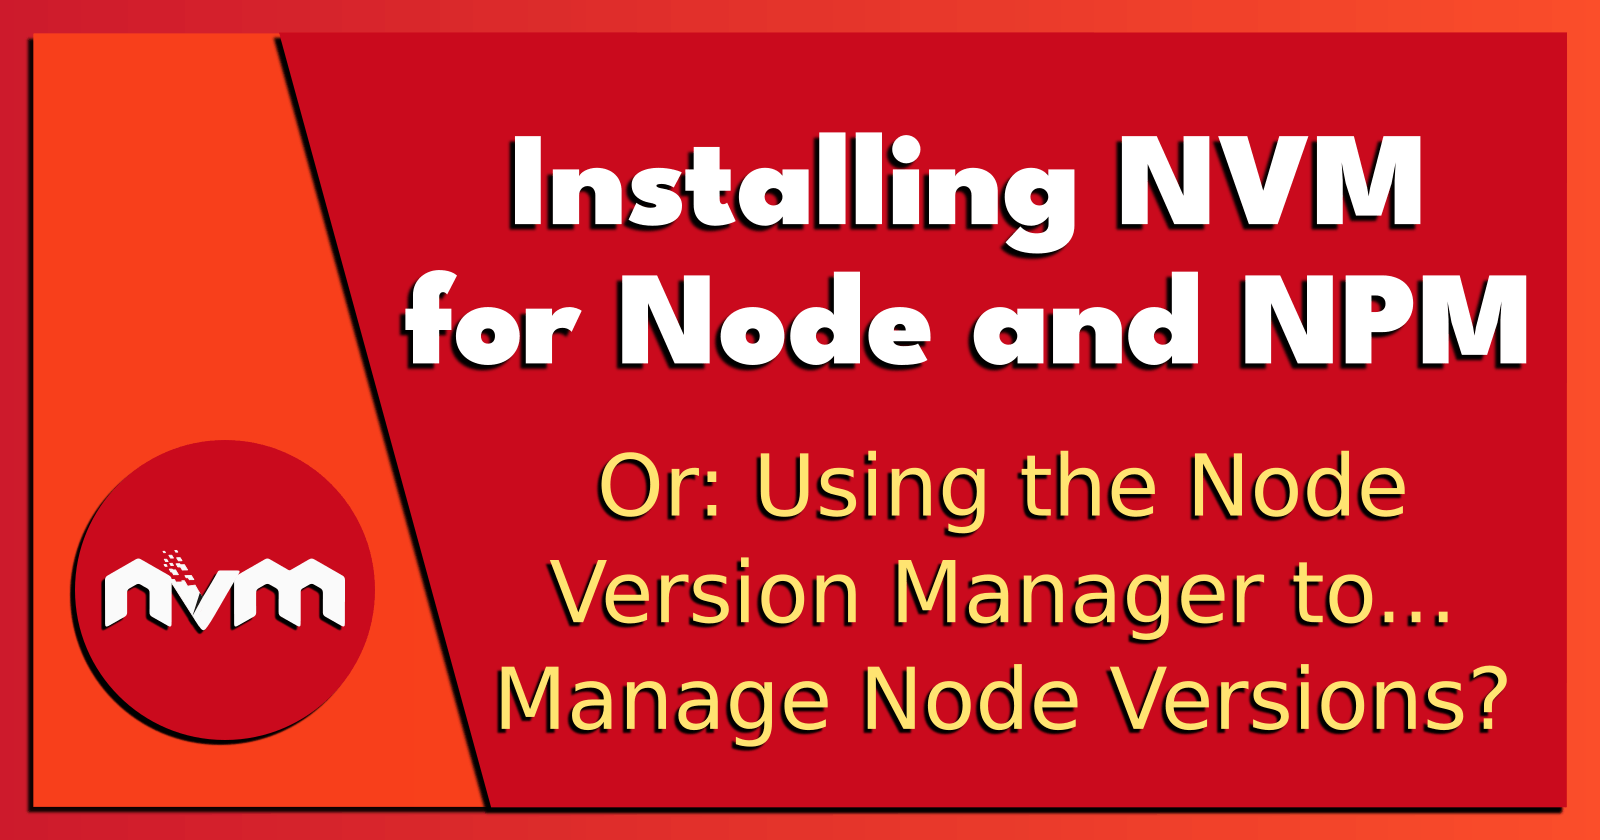 Installing NVM for Node and NPM.